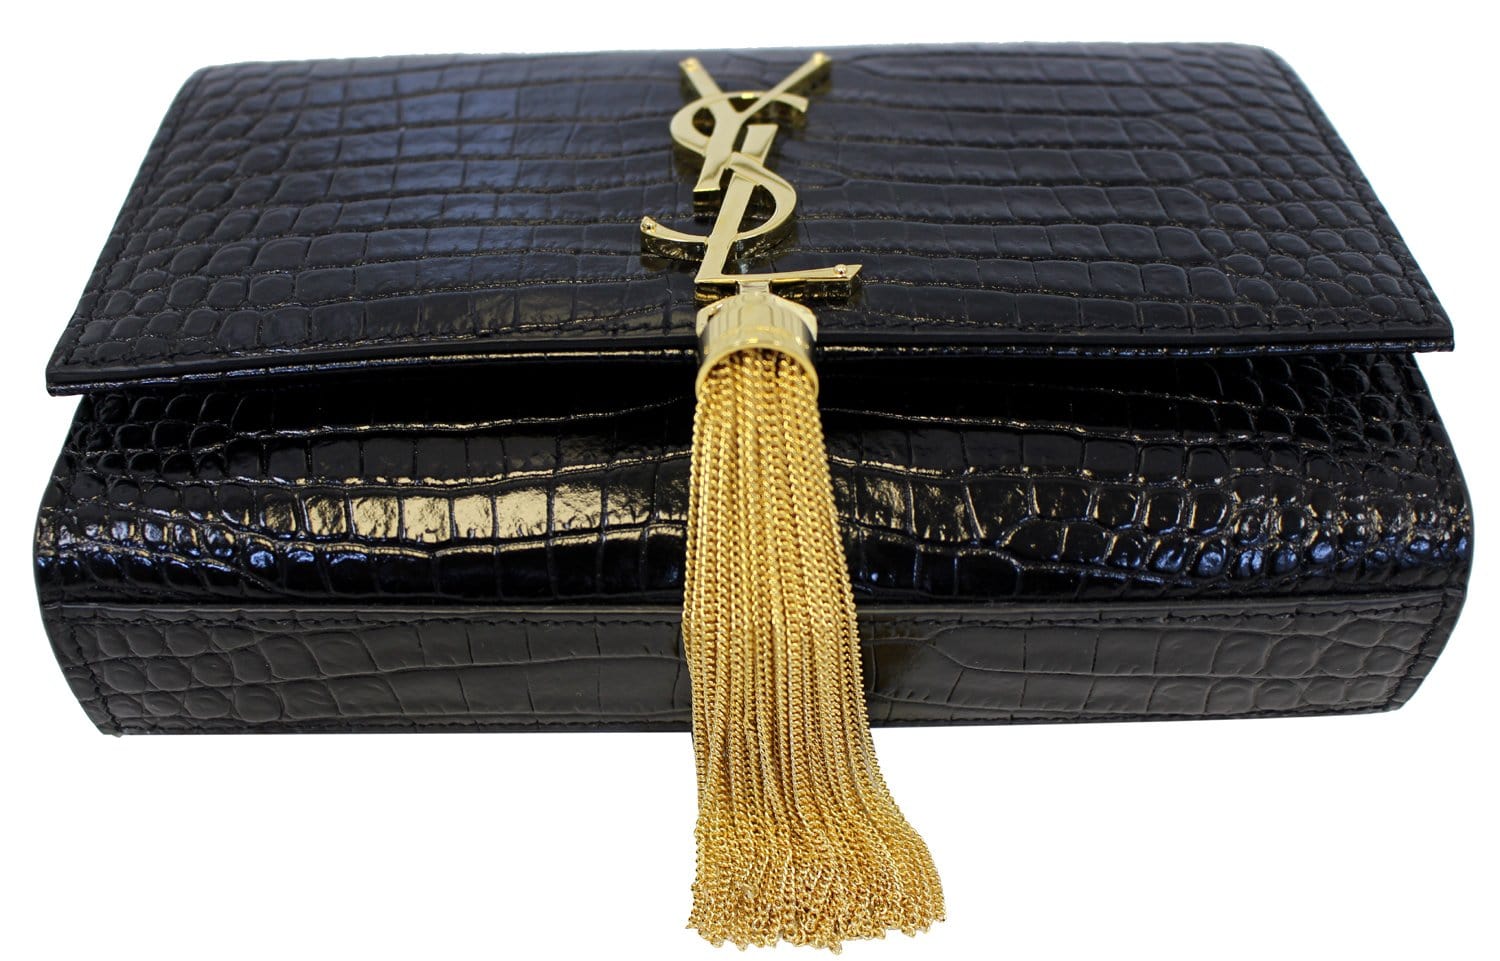 Yves Saint Laurent, Bags, Ysl Leather Clutch In Noirgold Hardware